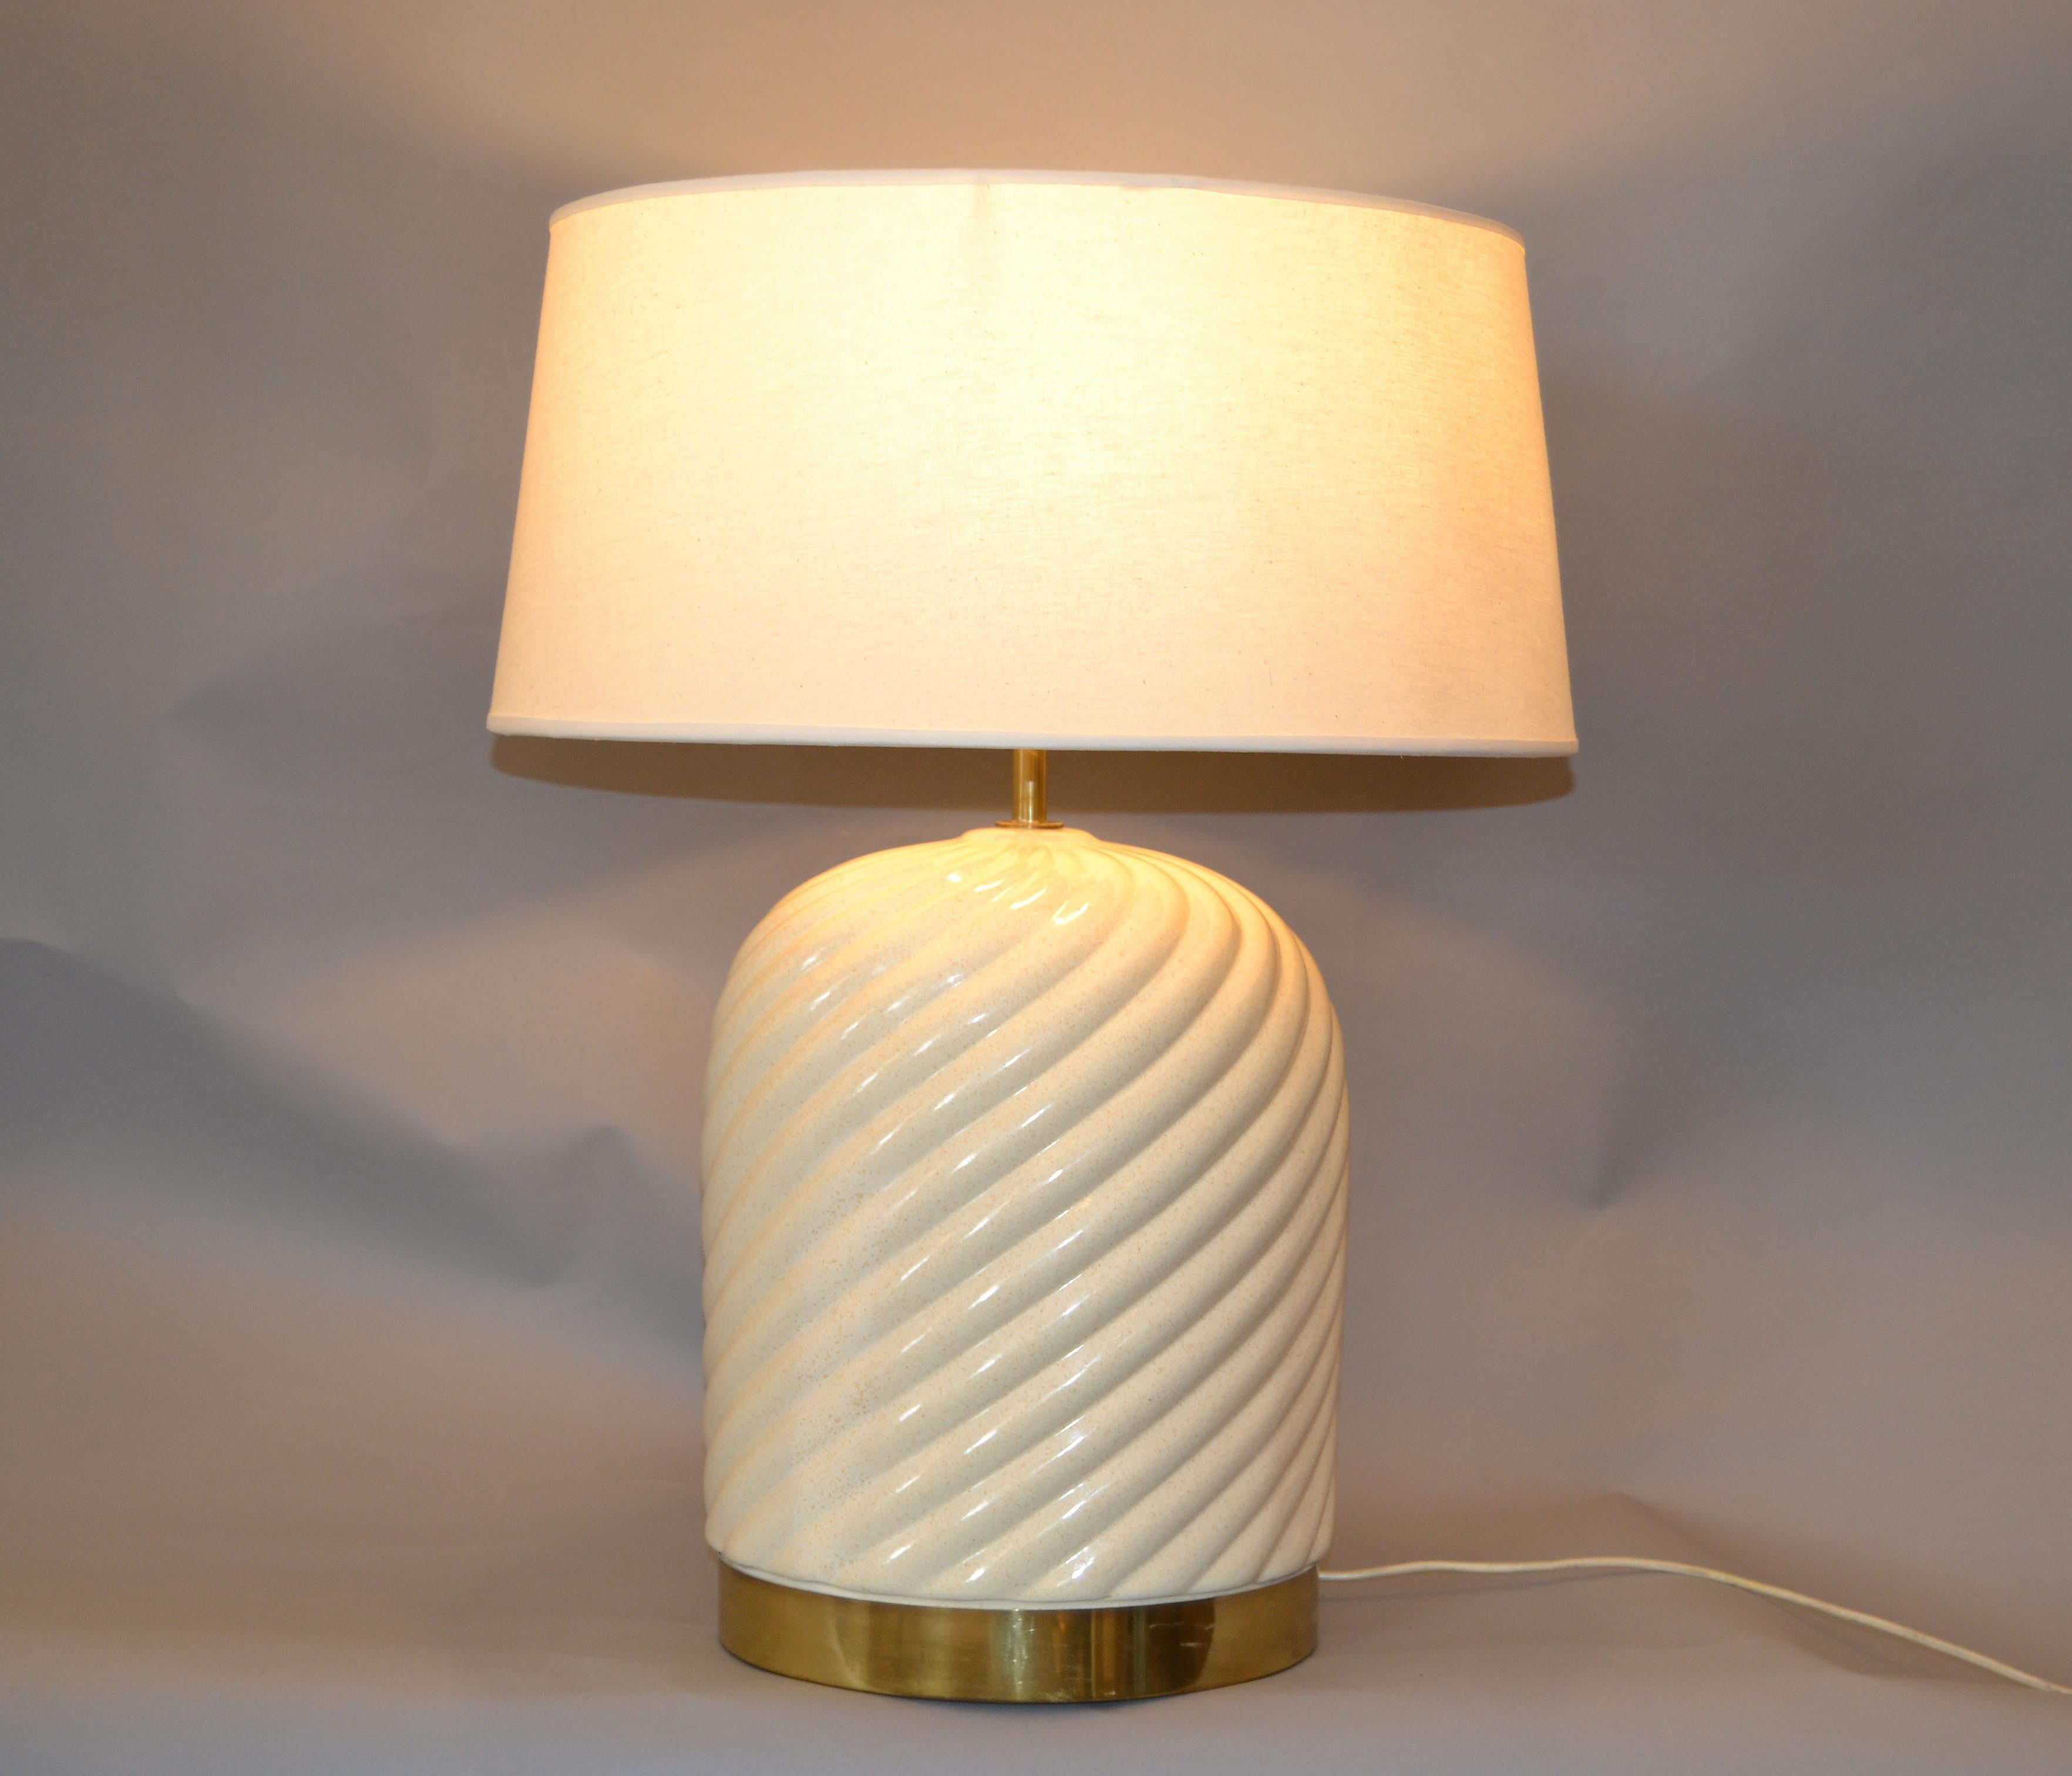 Mid-Century Modern ceramic and brass table lamp in beige color with off white shade.
Designed by Tommaso Barbi and manufactured for Barbi by B. Ceramiche in the late 1960s.
Makers mark inside the lamp.
In perfect working condition and uses a max.